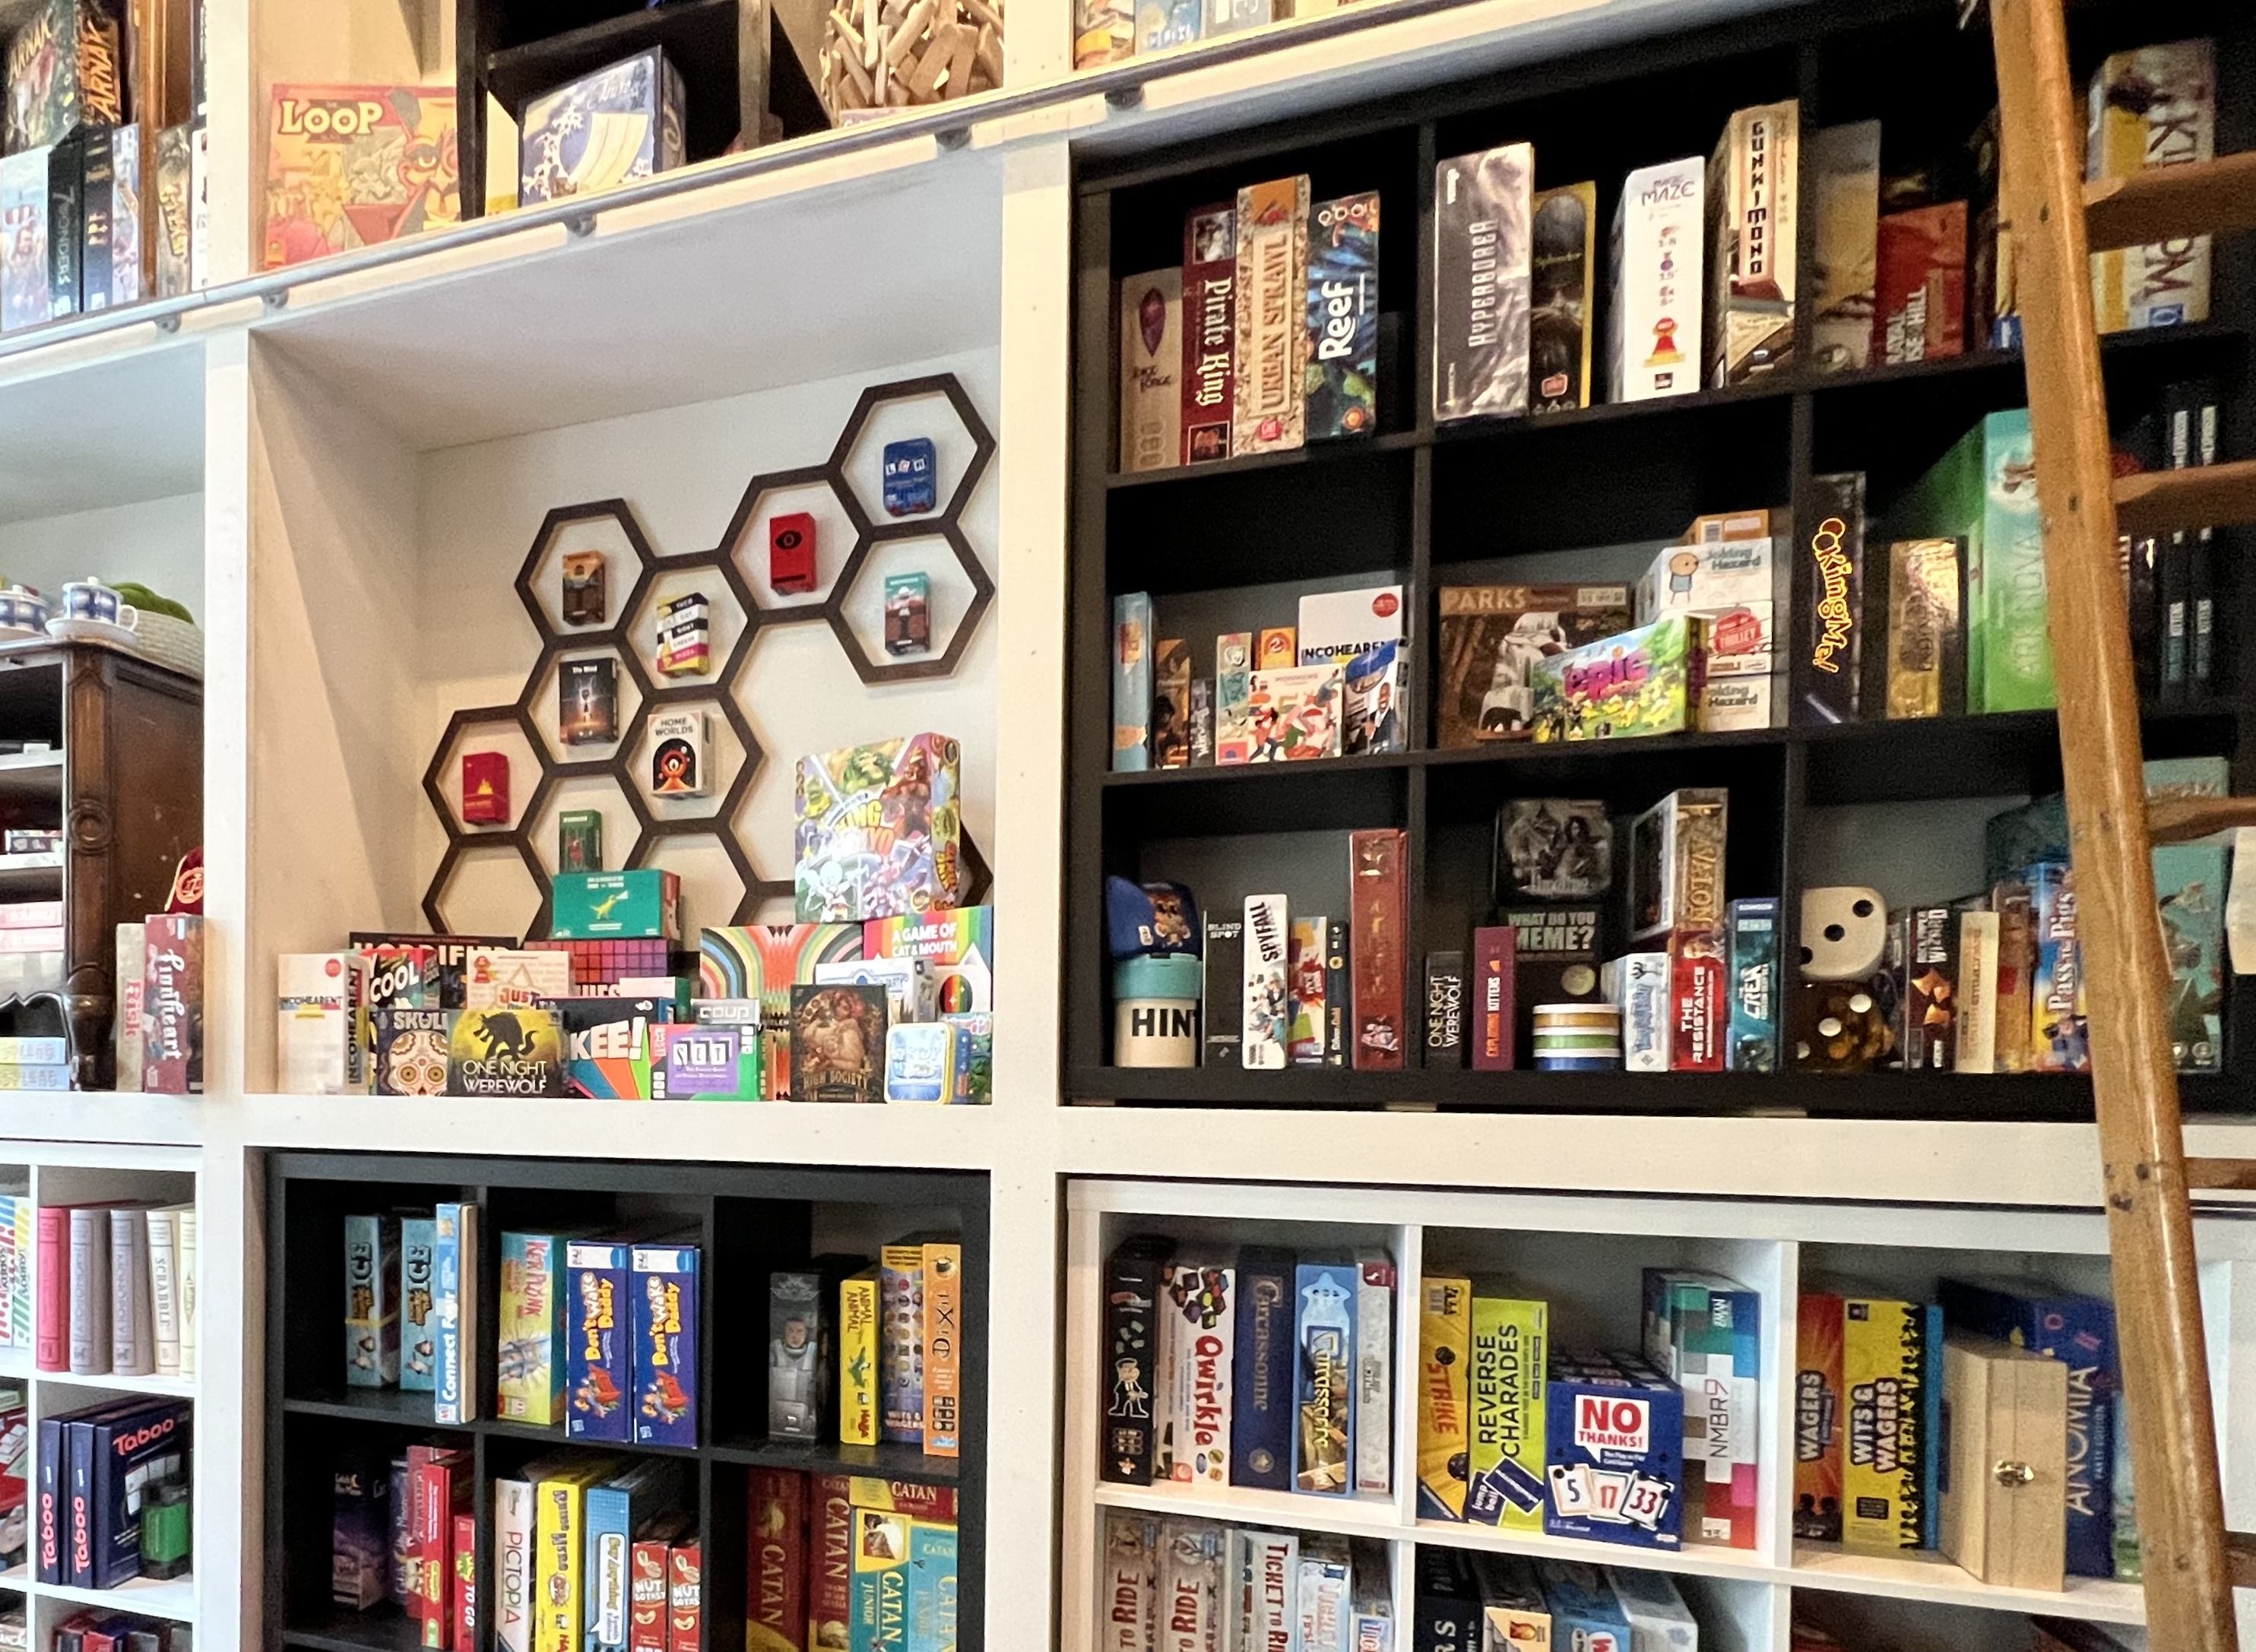 Drawing Games  Across the Board Game Cafe